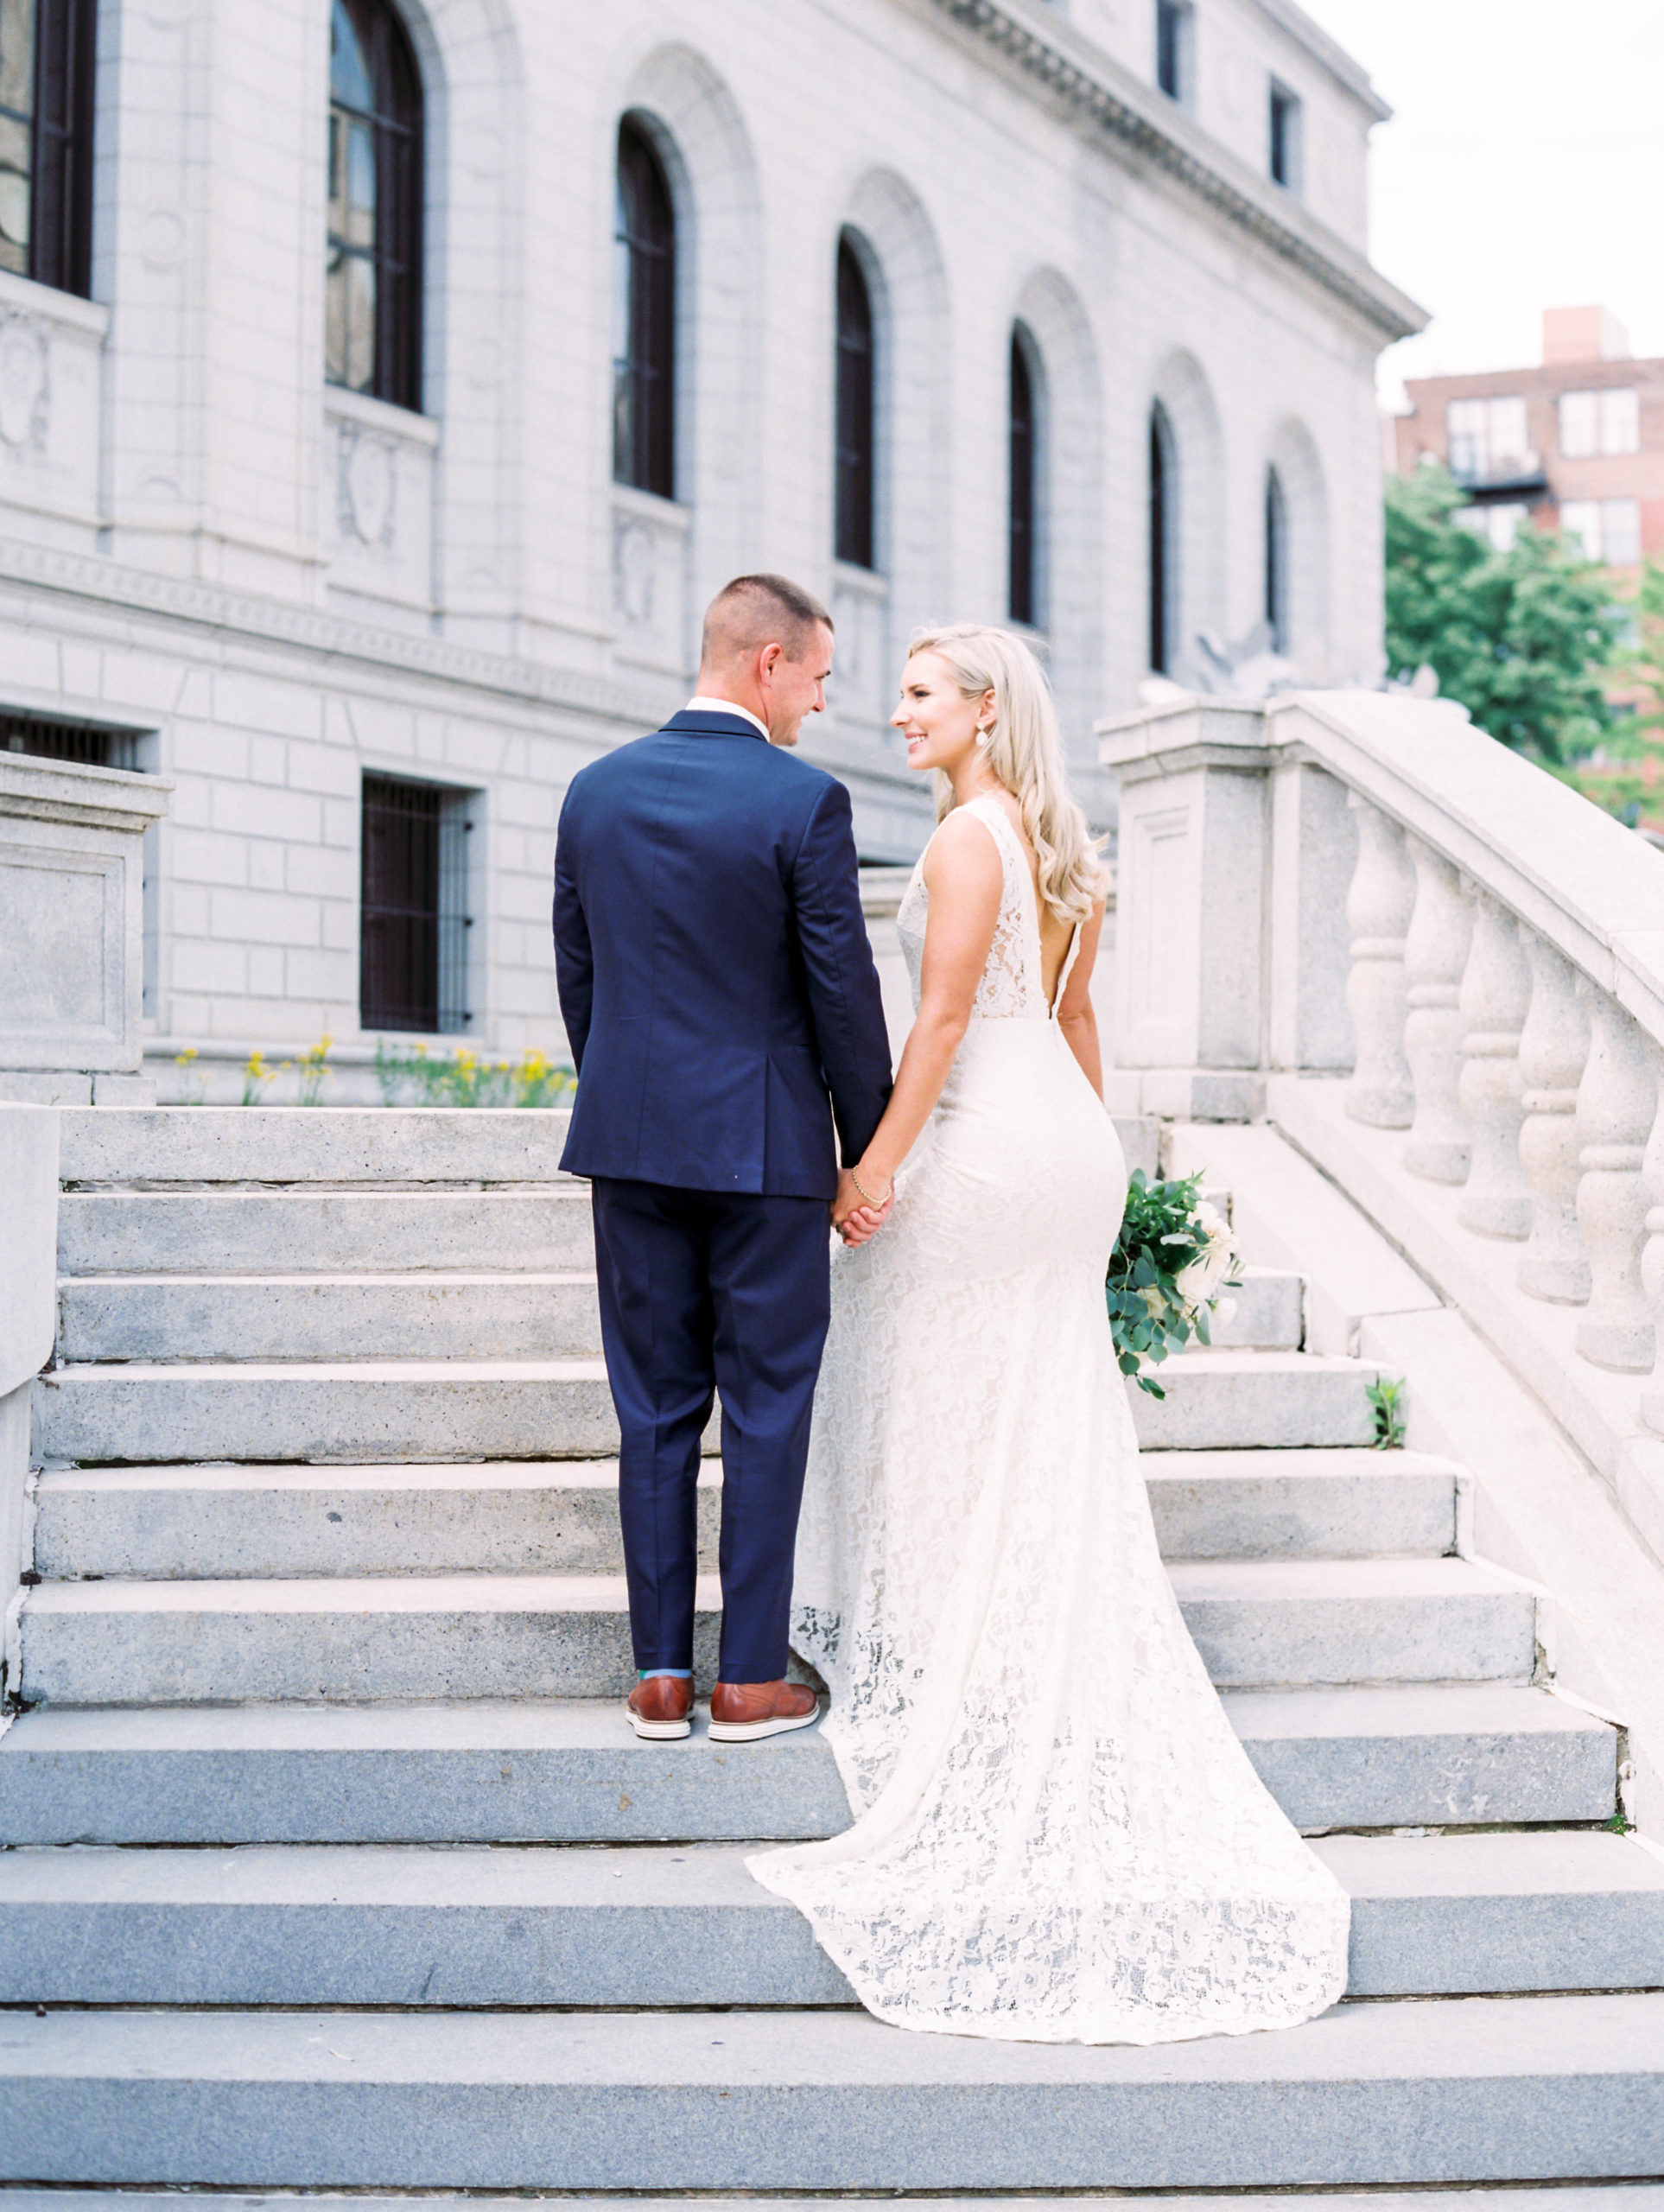 wedding photos at the St Louis Central Library